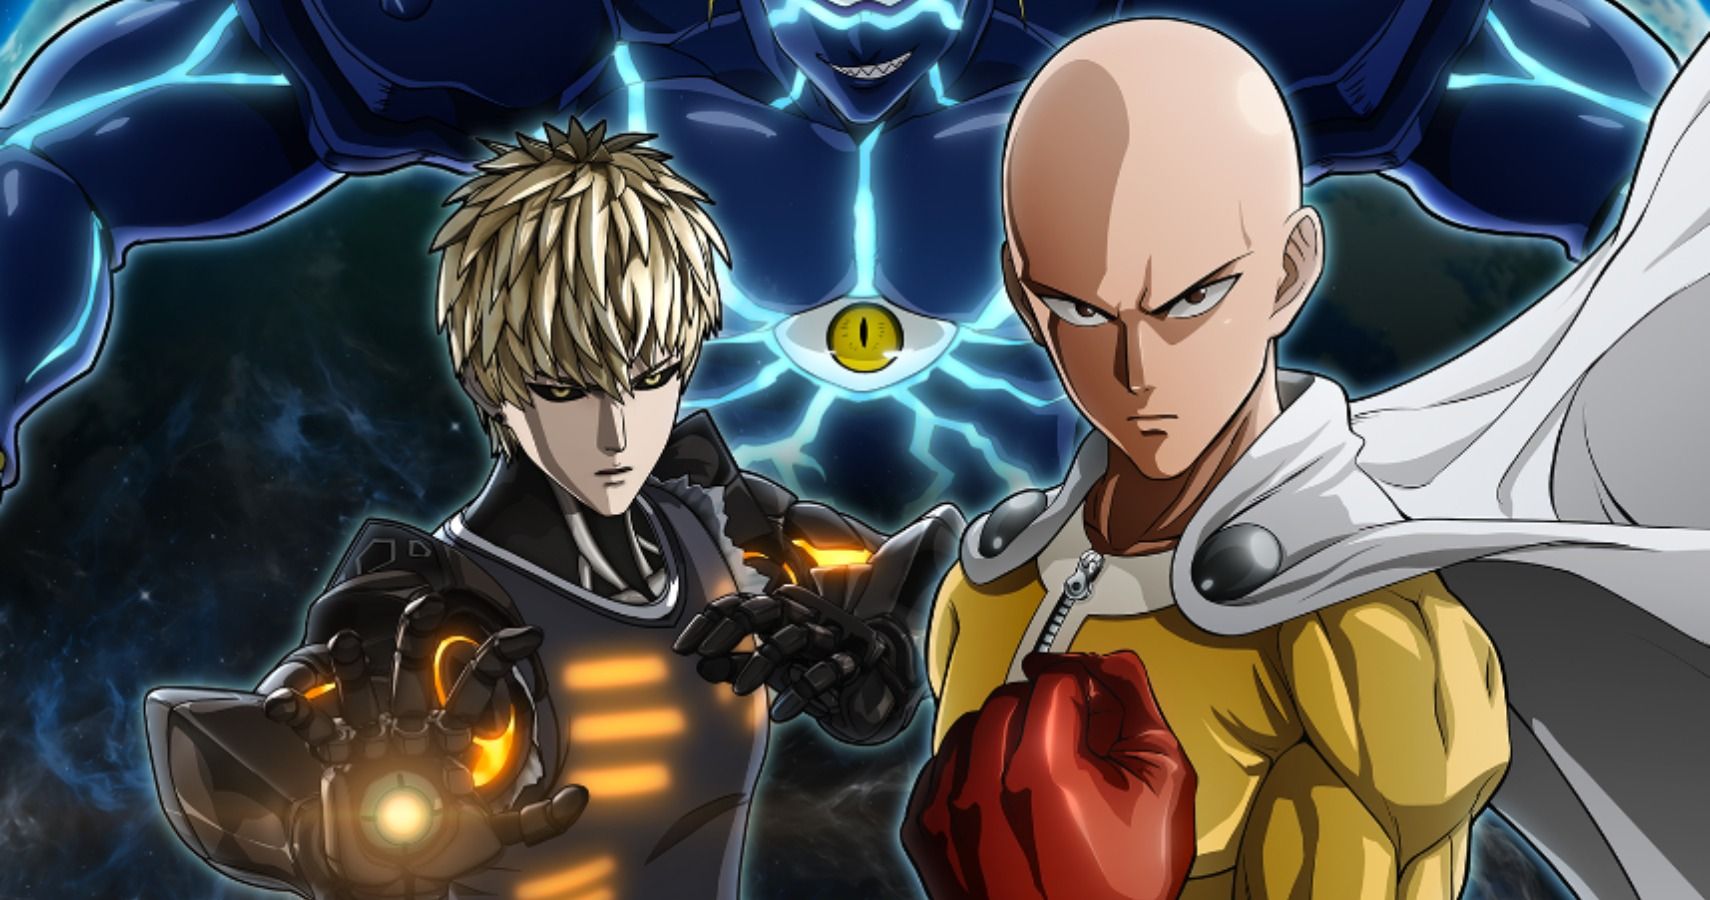 one punch man video game